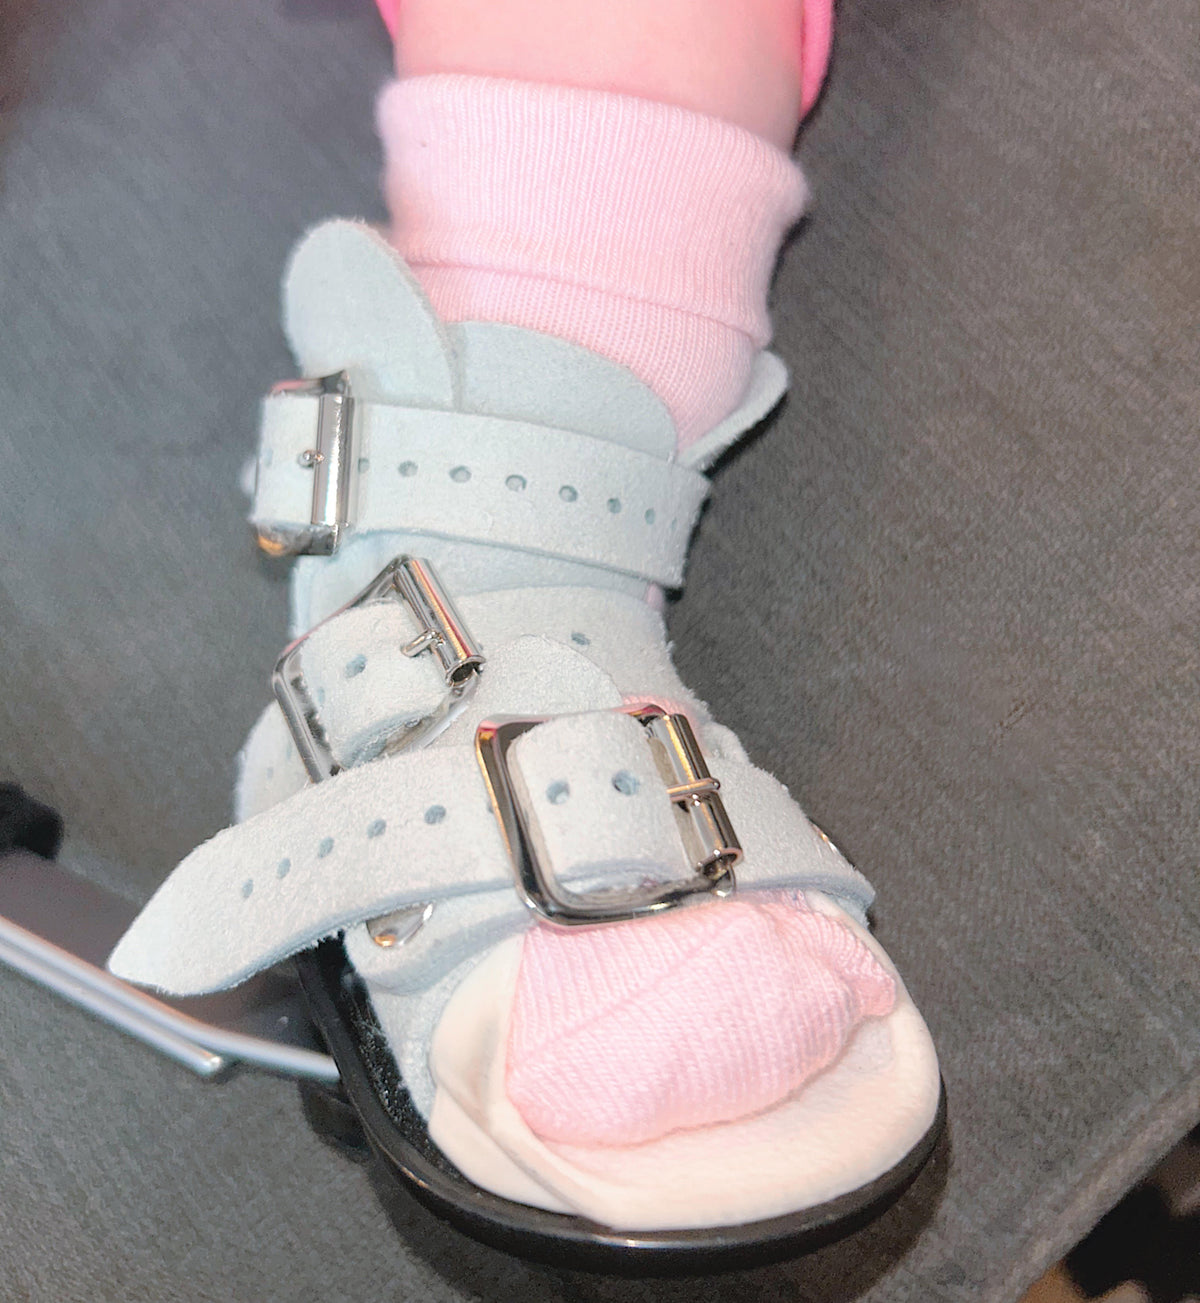 Talipes (clubfoot) Boots and Bar Socks - Non-Slip Stay On Baby and Toddler Socks - 7 Pack in Pink, Blush Stripe & Oatmeal